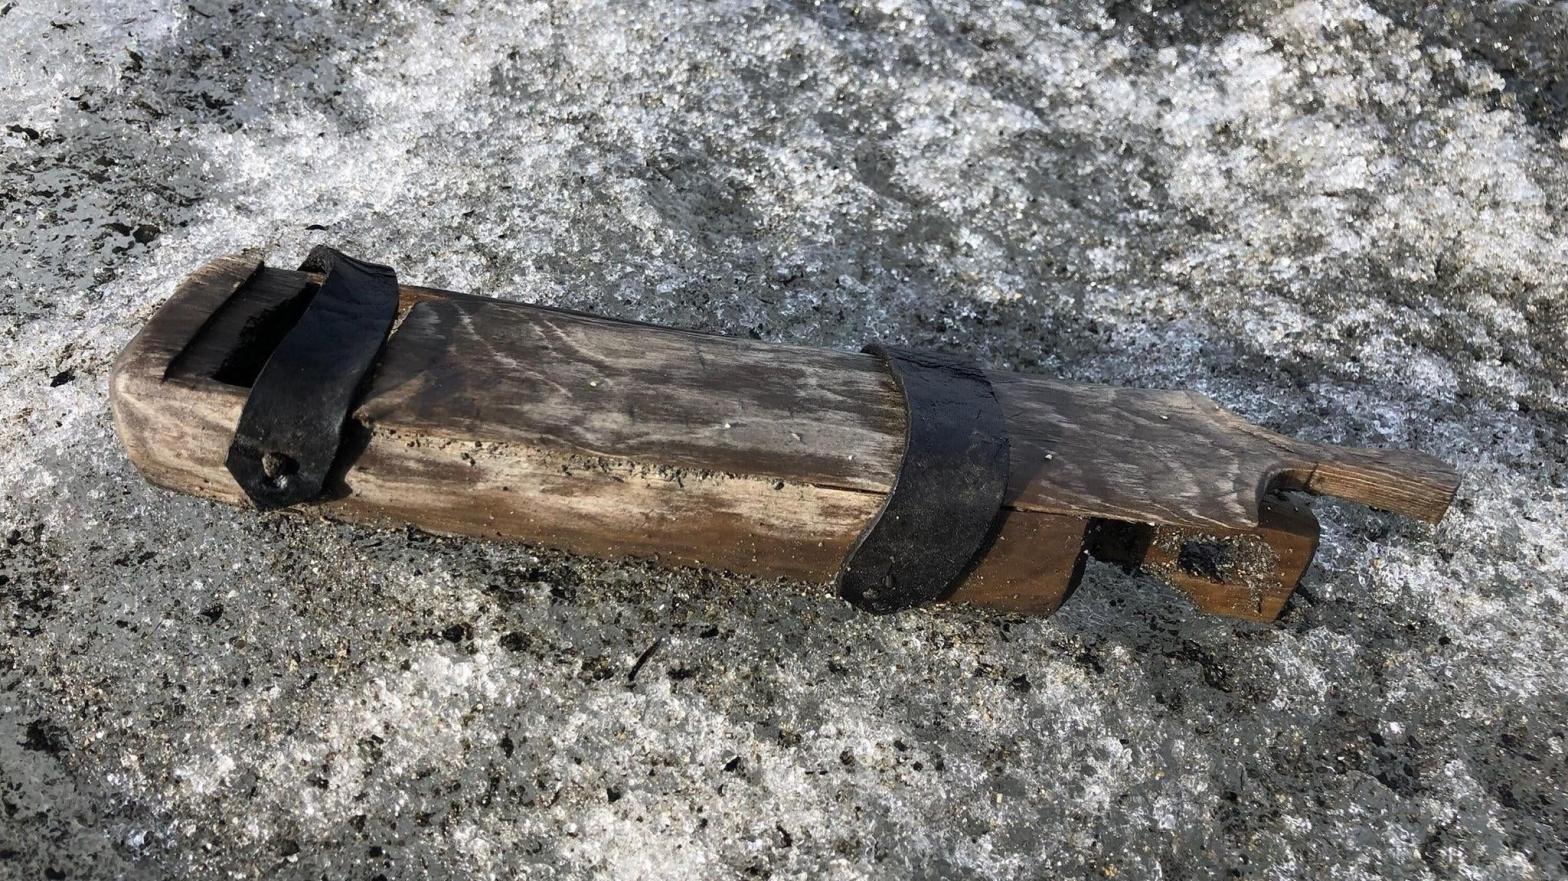 The wooden box found on the Lendbreen ice patch in Norway's Breheimen National Park. (Image: The Glacier Archaeology Program Innlandet)